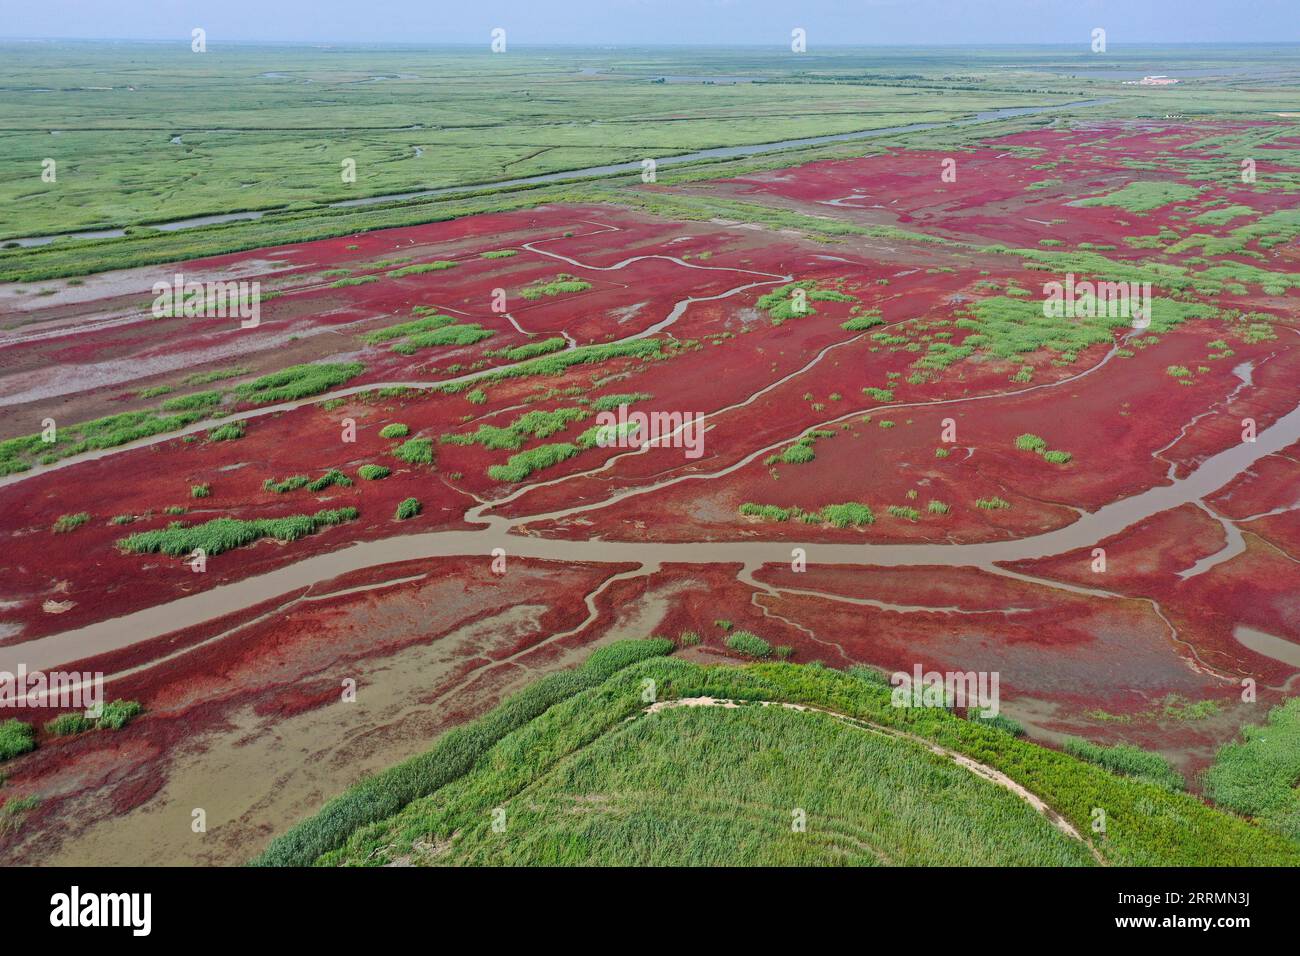 221107 -- PANJIN, Nov. 7, 2022 -- This aerial photo taken on Aug. 19, 2021 shows red beaches in Liaohe River Delta in Panjin, northeast China s Liaoning Province. Various types of wetlands have been found in the Liaohe River Delta. The tidelands there are covered by the suaeda salsa, which turn red on the beach in autumn.  CHINA-LIAONING-PANJIN-WETLAND CN YaoxJianfeng PUBLICATIONxNOTxINxCHN Stock Photo